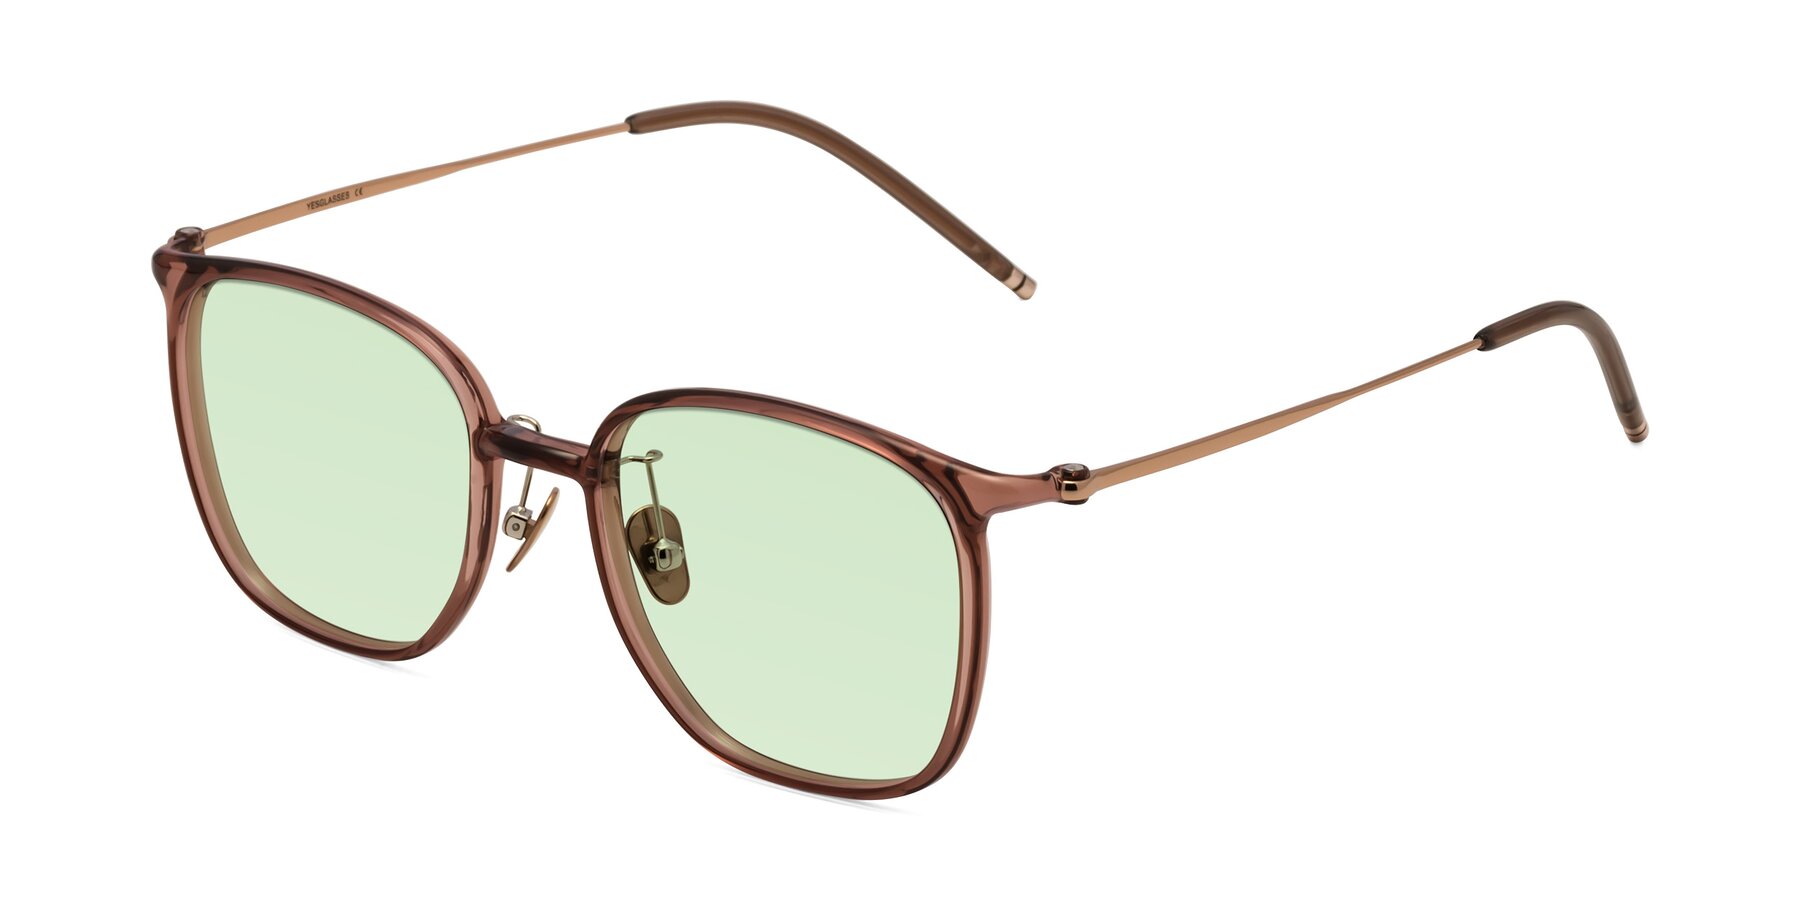 Angle of Manlius in Redwood with Light Green Tinted Lenses